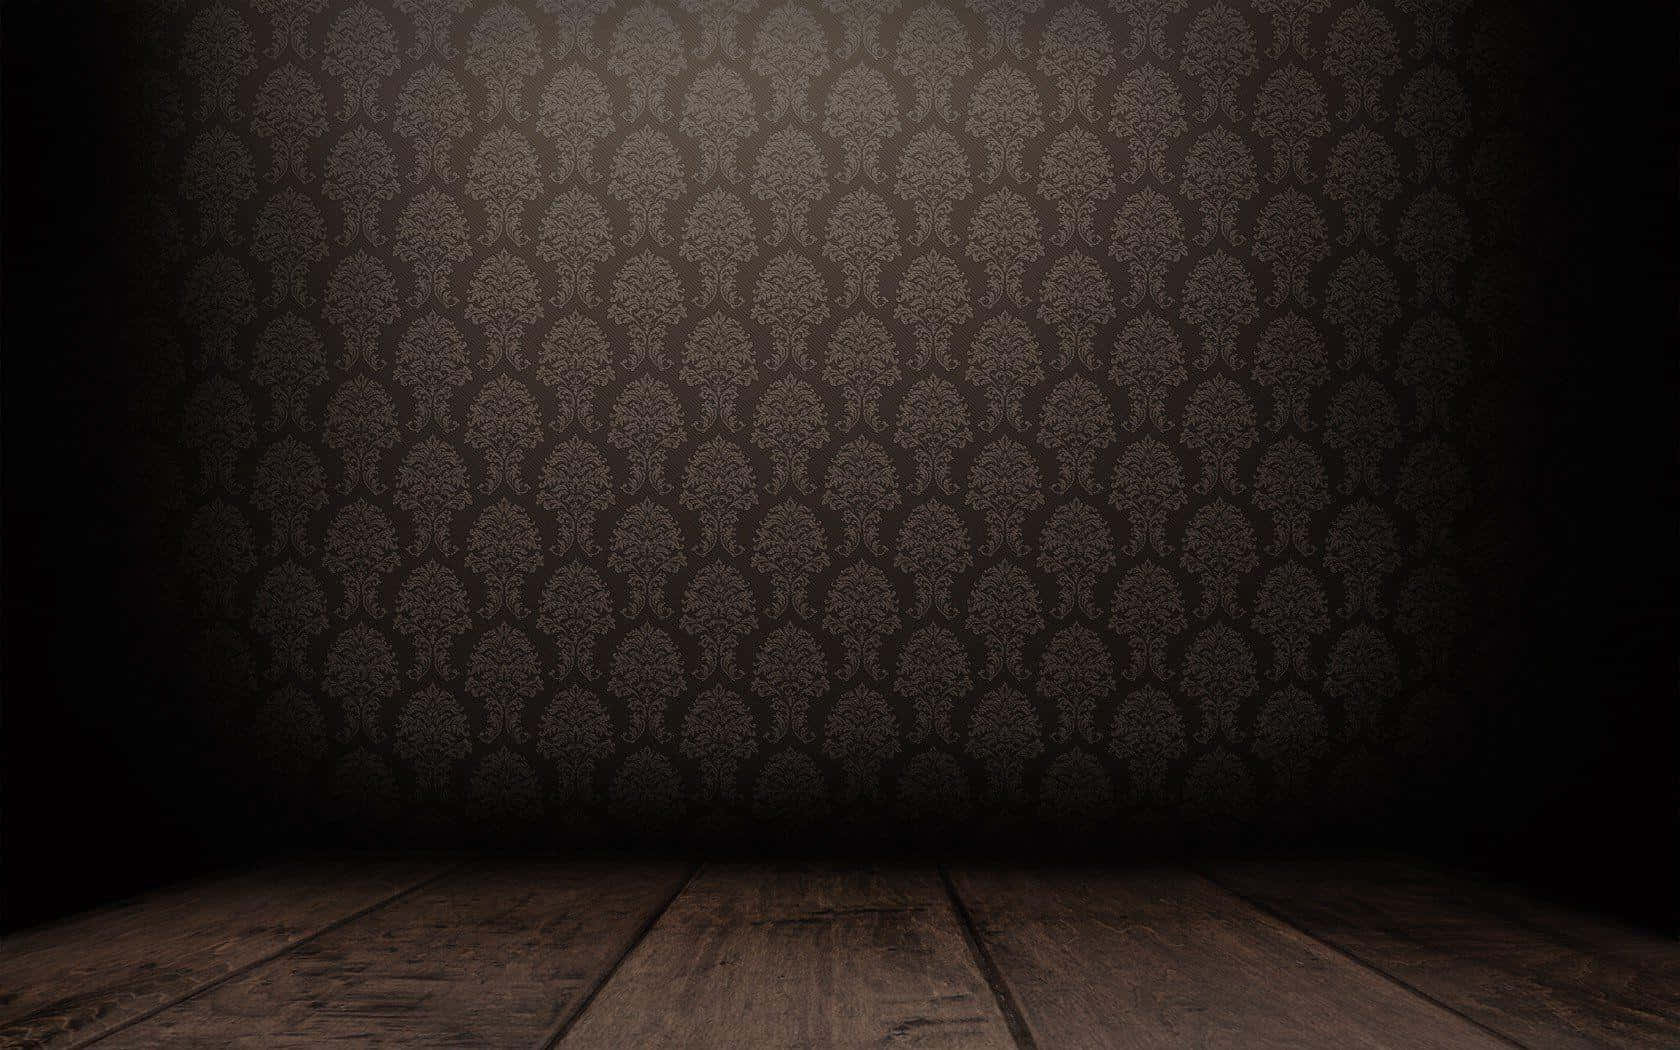 An Empty Room With A Dark Wallpaper And Wooden Floor